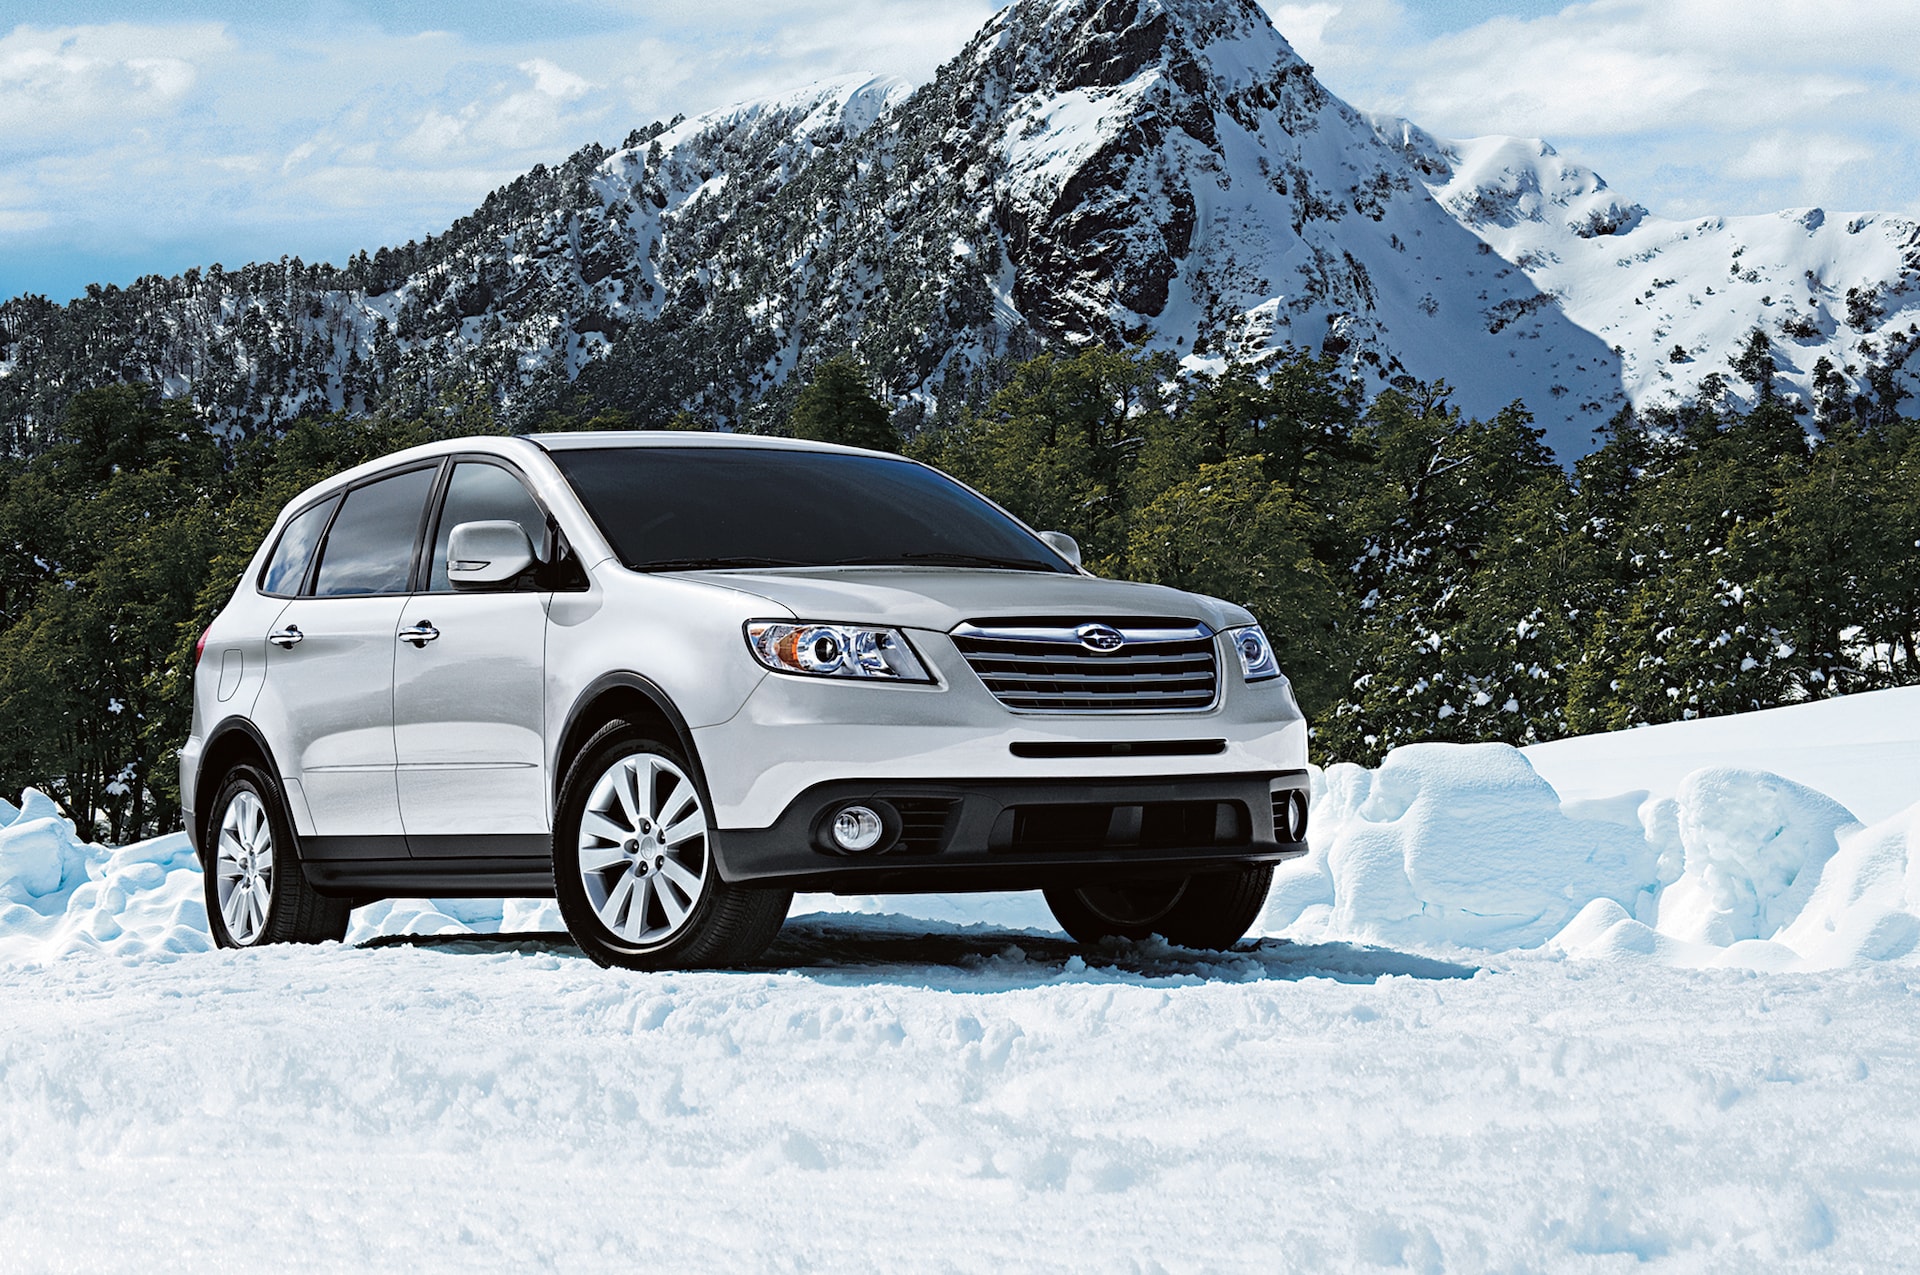 Subaru Tribeca Discontinued After 2014, Replacement Coming